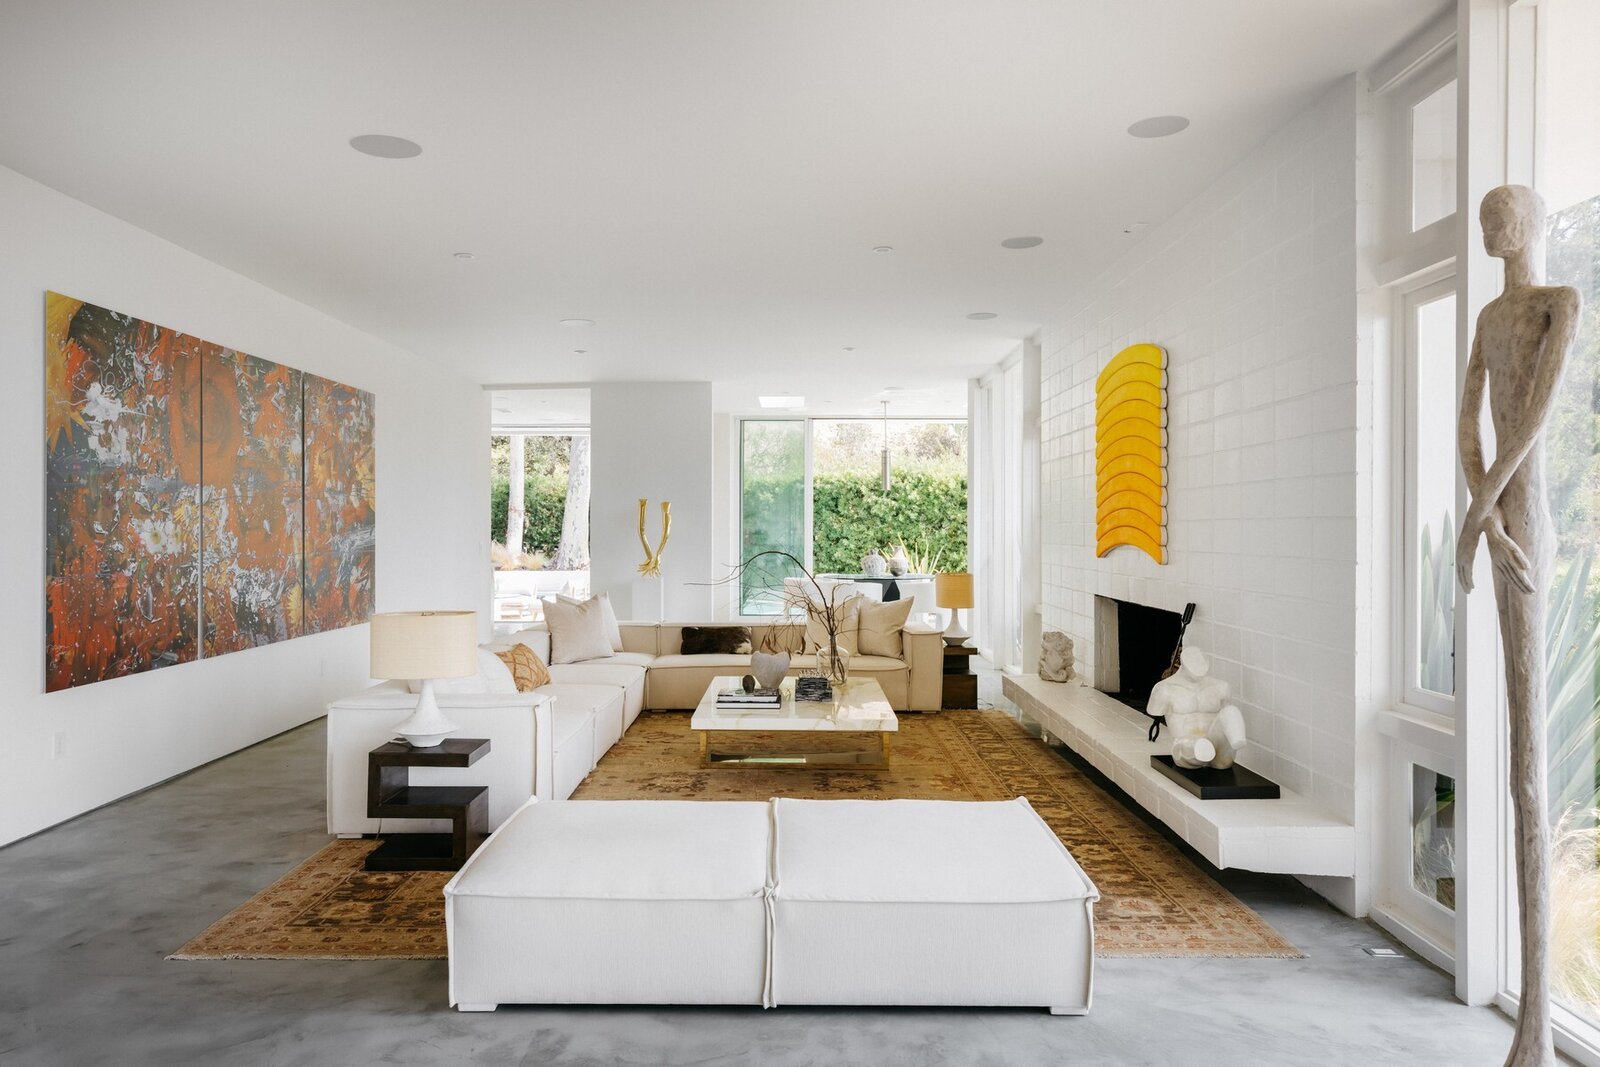 A Restored Midcentury Jewel With A Separate Guest Suite in Hollywood Hills